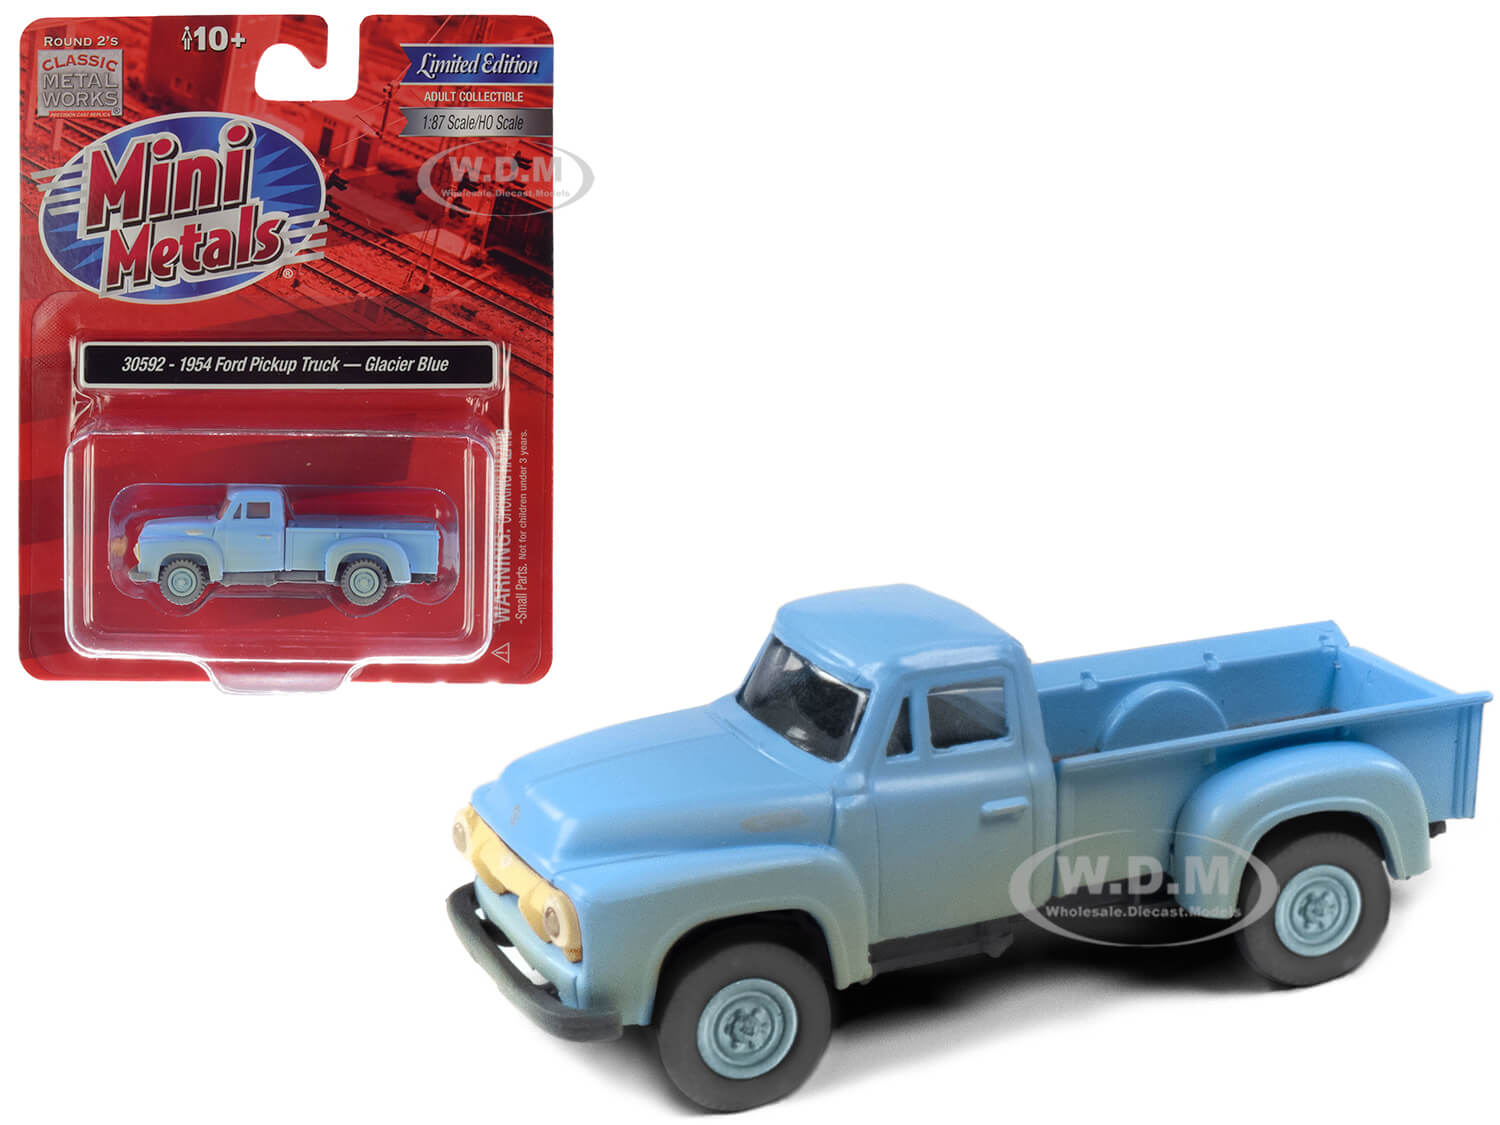 1954 Ford Pickup Truck Glacier Blue (dirty/weathered) 1/87 (ho) Scale Model Car By Classic Metal Works